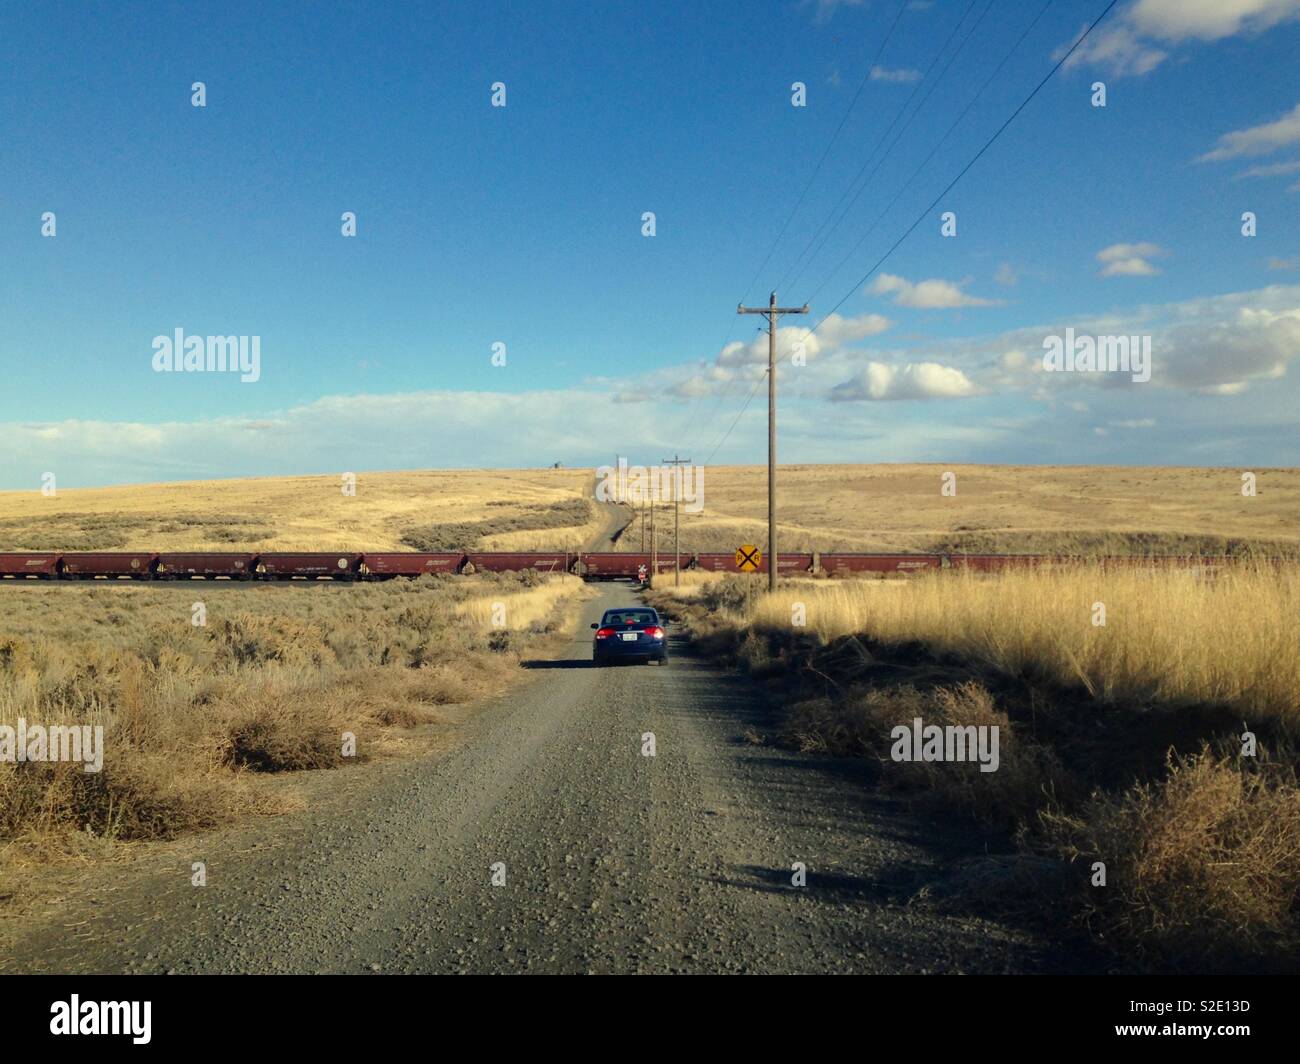 Car stops for a long train on straight gravel road with wheat fields on both sides in southeastern Washington state with wide horizon, blue sky, and expressive clouds Stock Photo